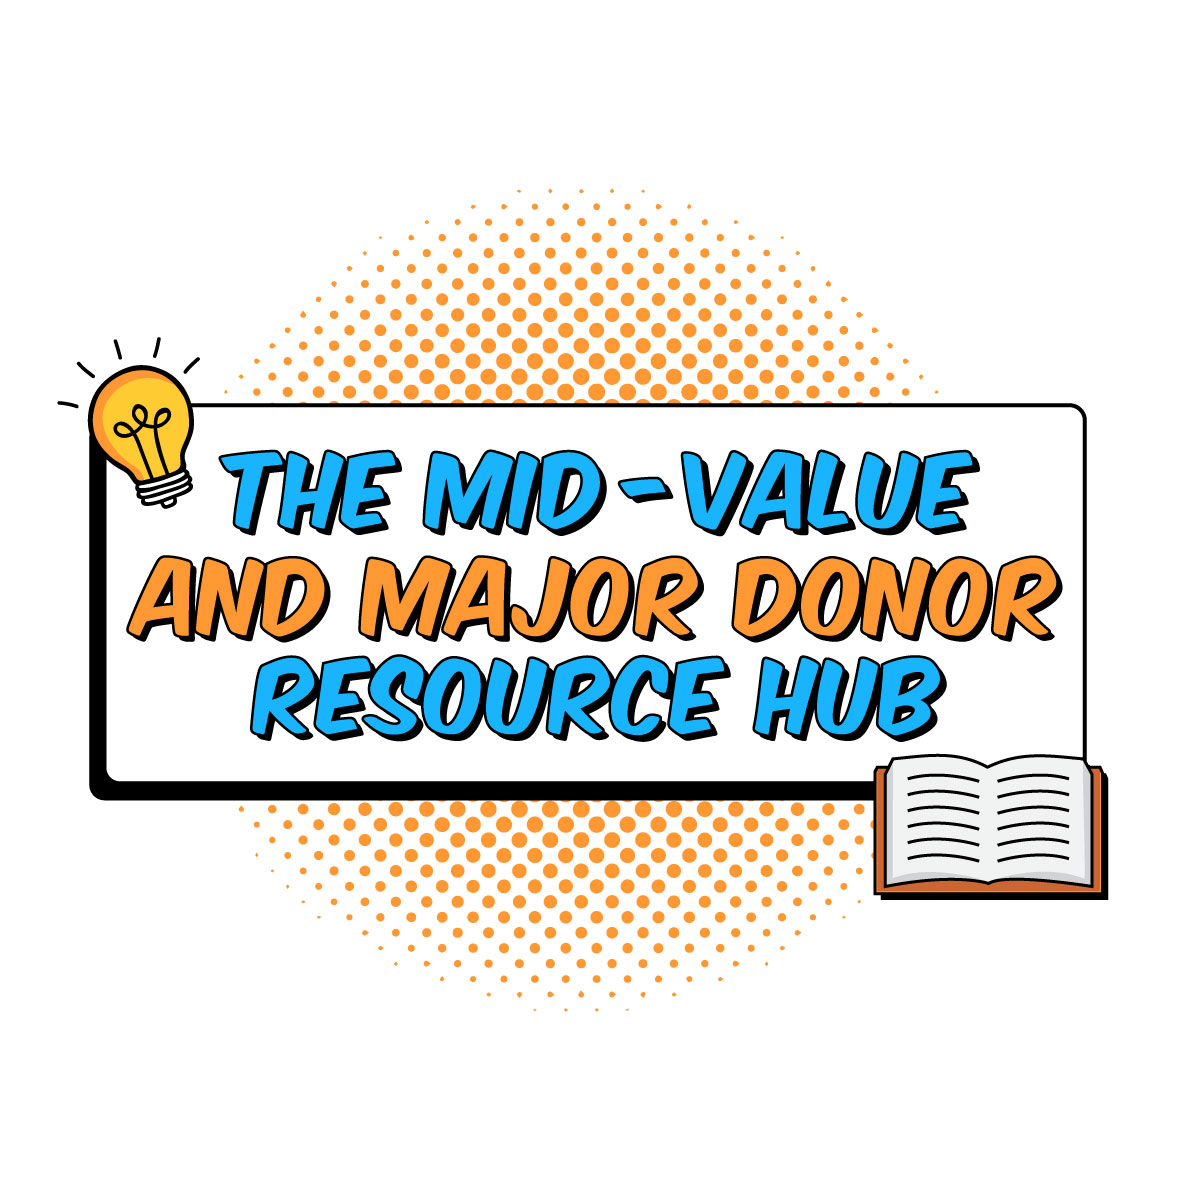 The Mid-Value and Major Donor Resource Hub